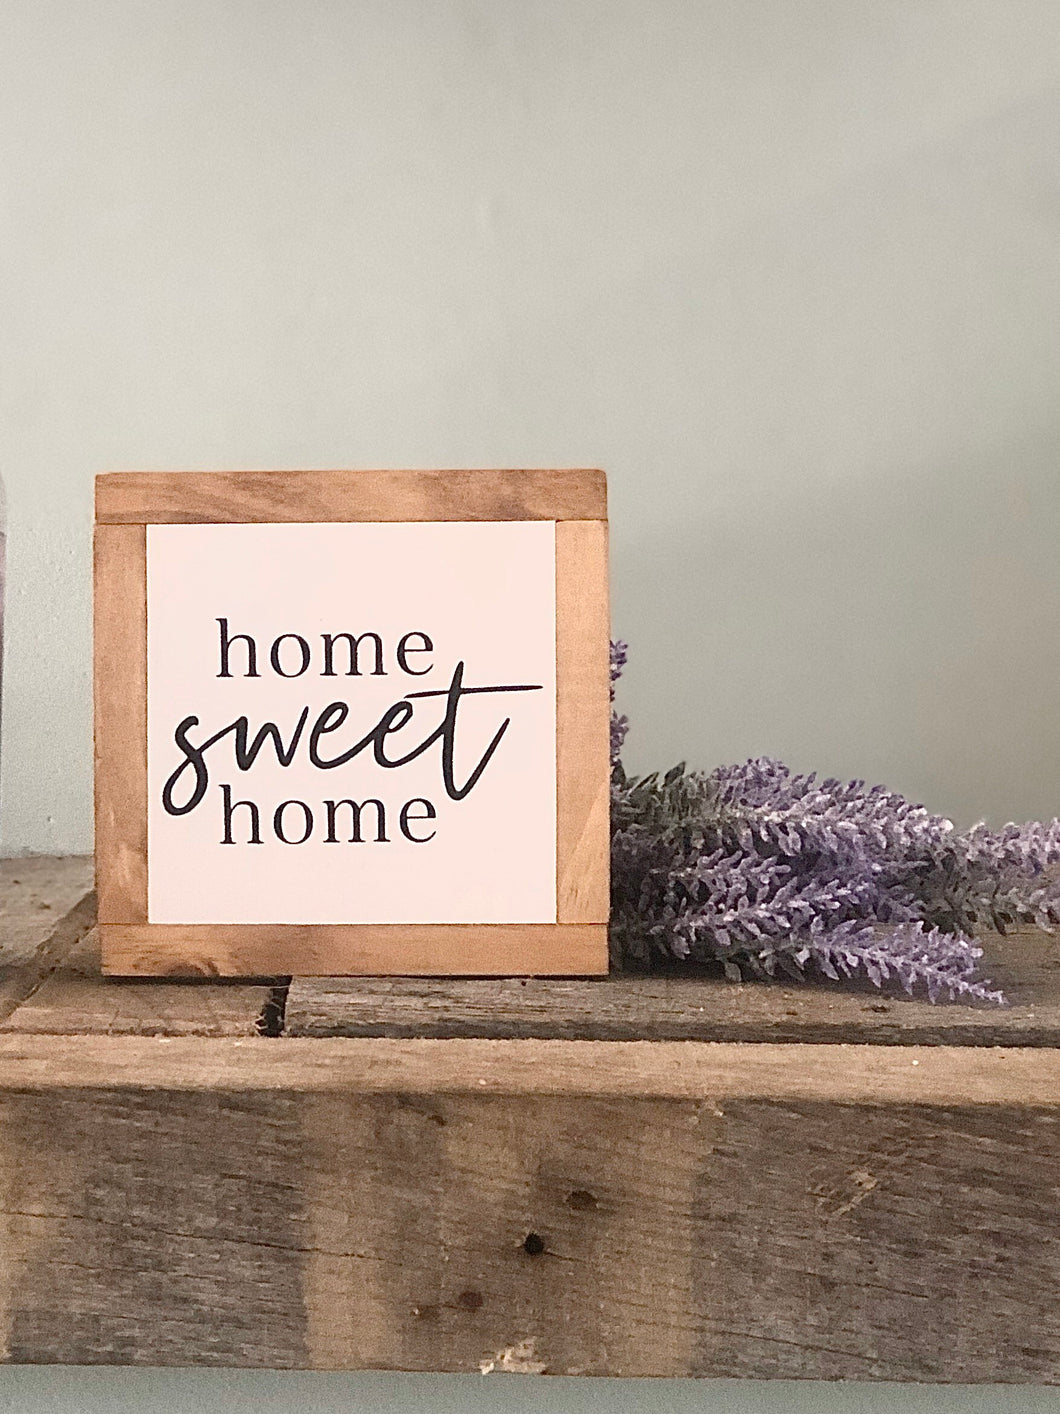 Home Sweet Home, Rustic Home Decor, Small Wood Sign, Tiered Tray Decor, Bog Road Designs